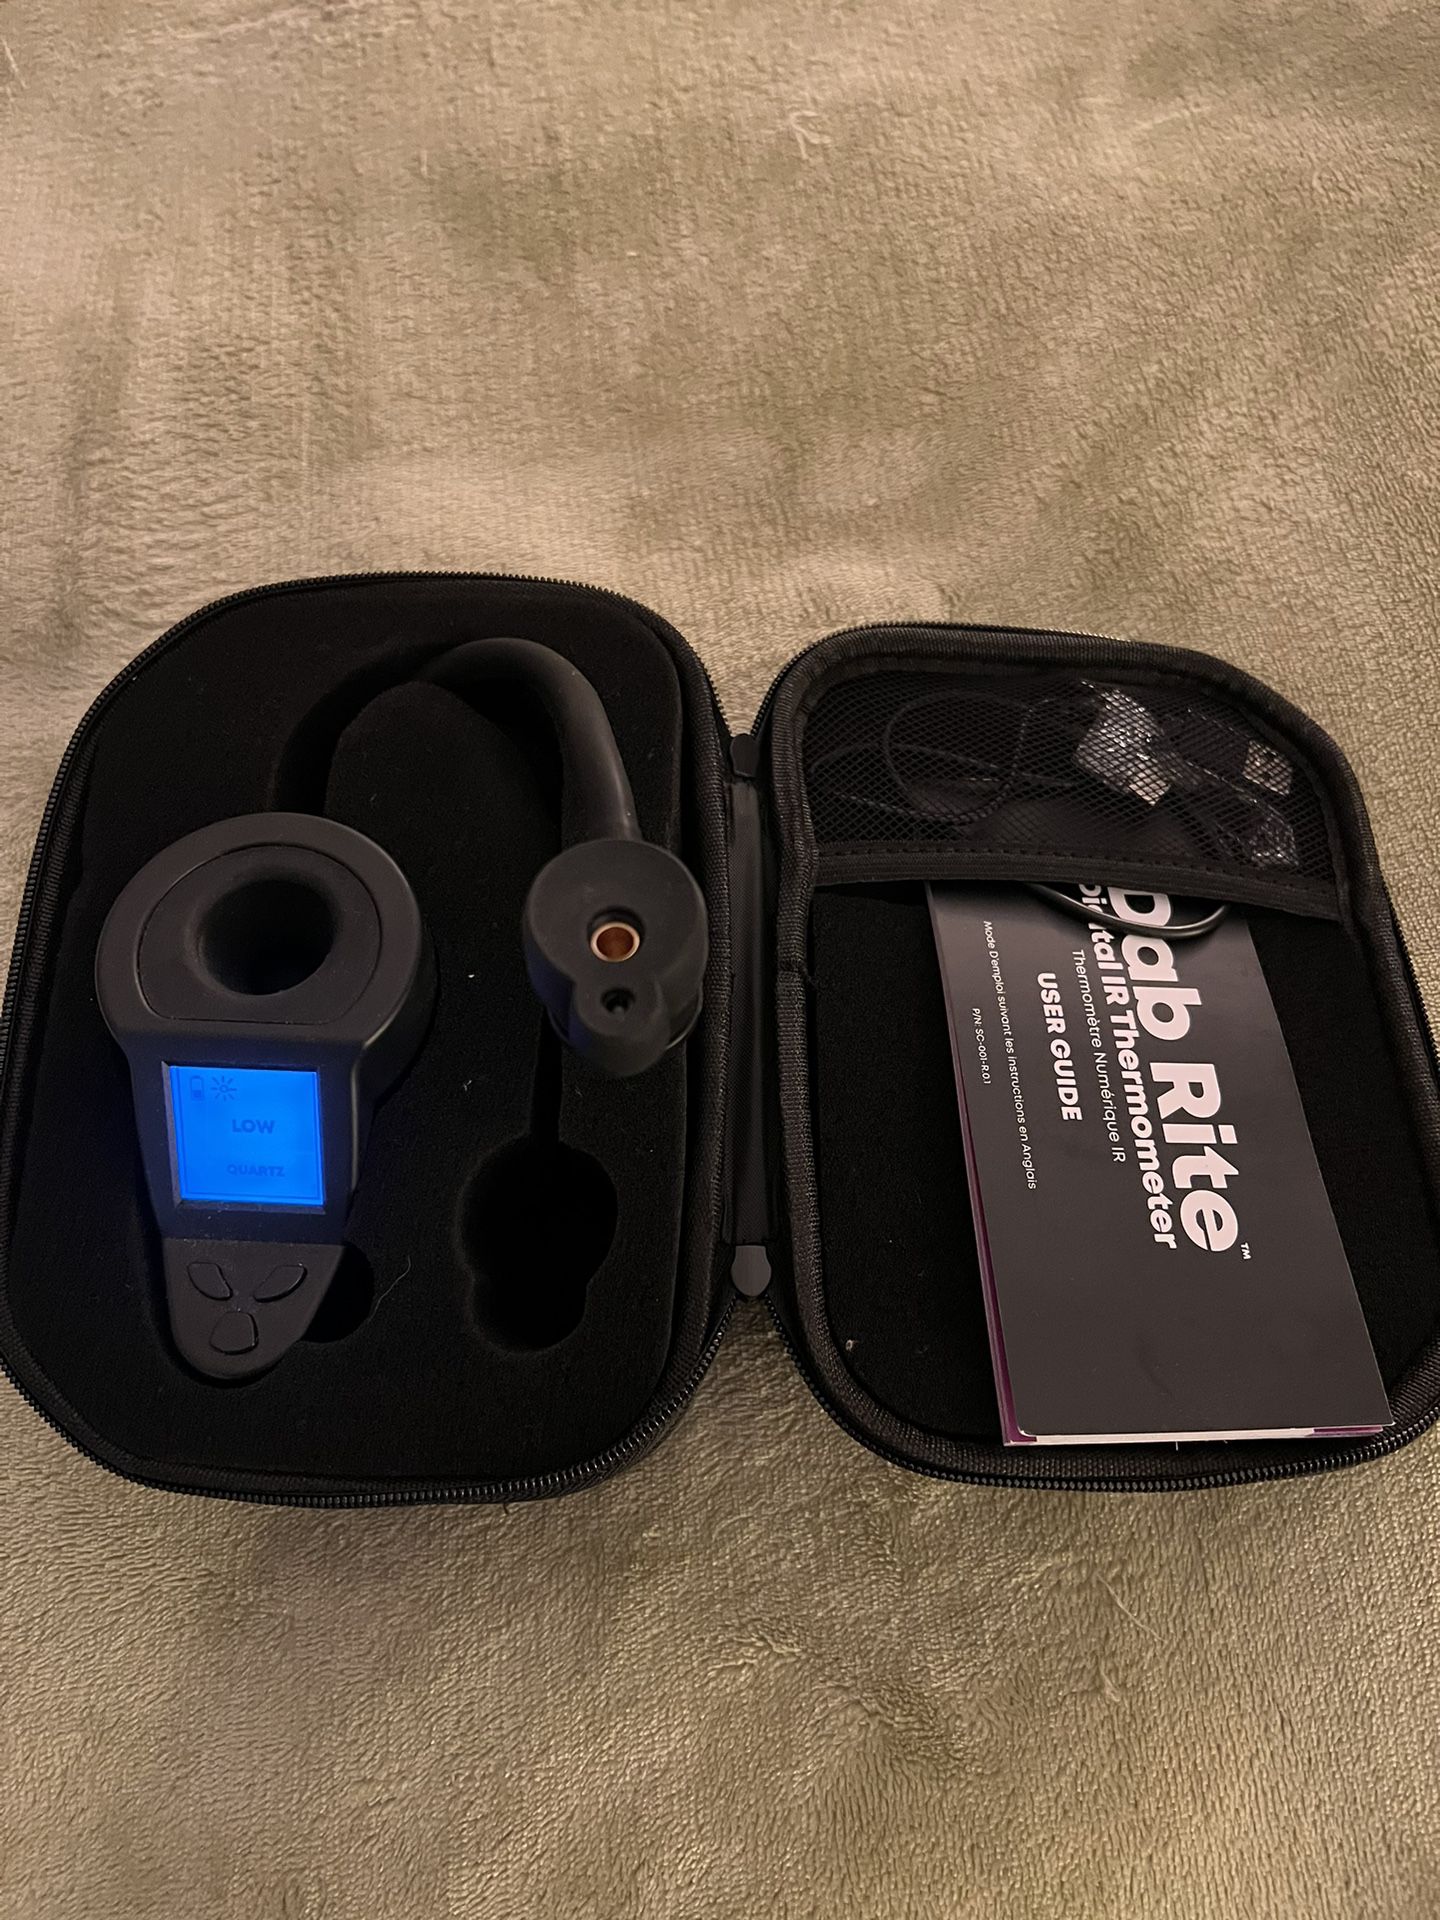 Dab Rite IR Thermometer V1.0 for Sale in Fort Lauderdale, FL - OfferUp